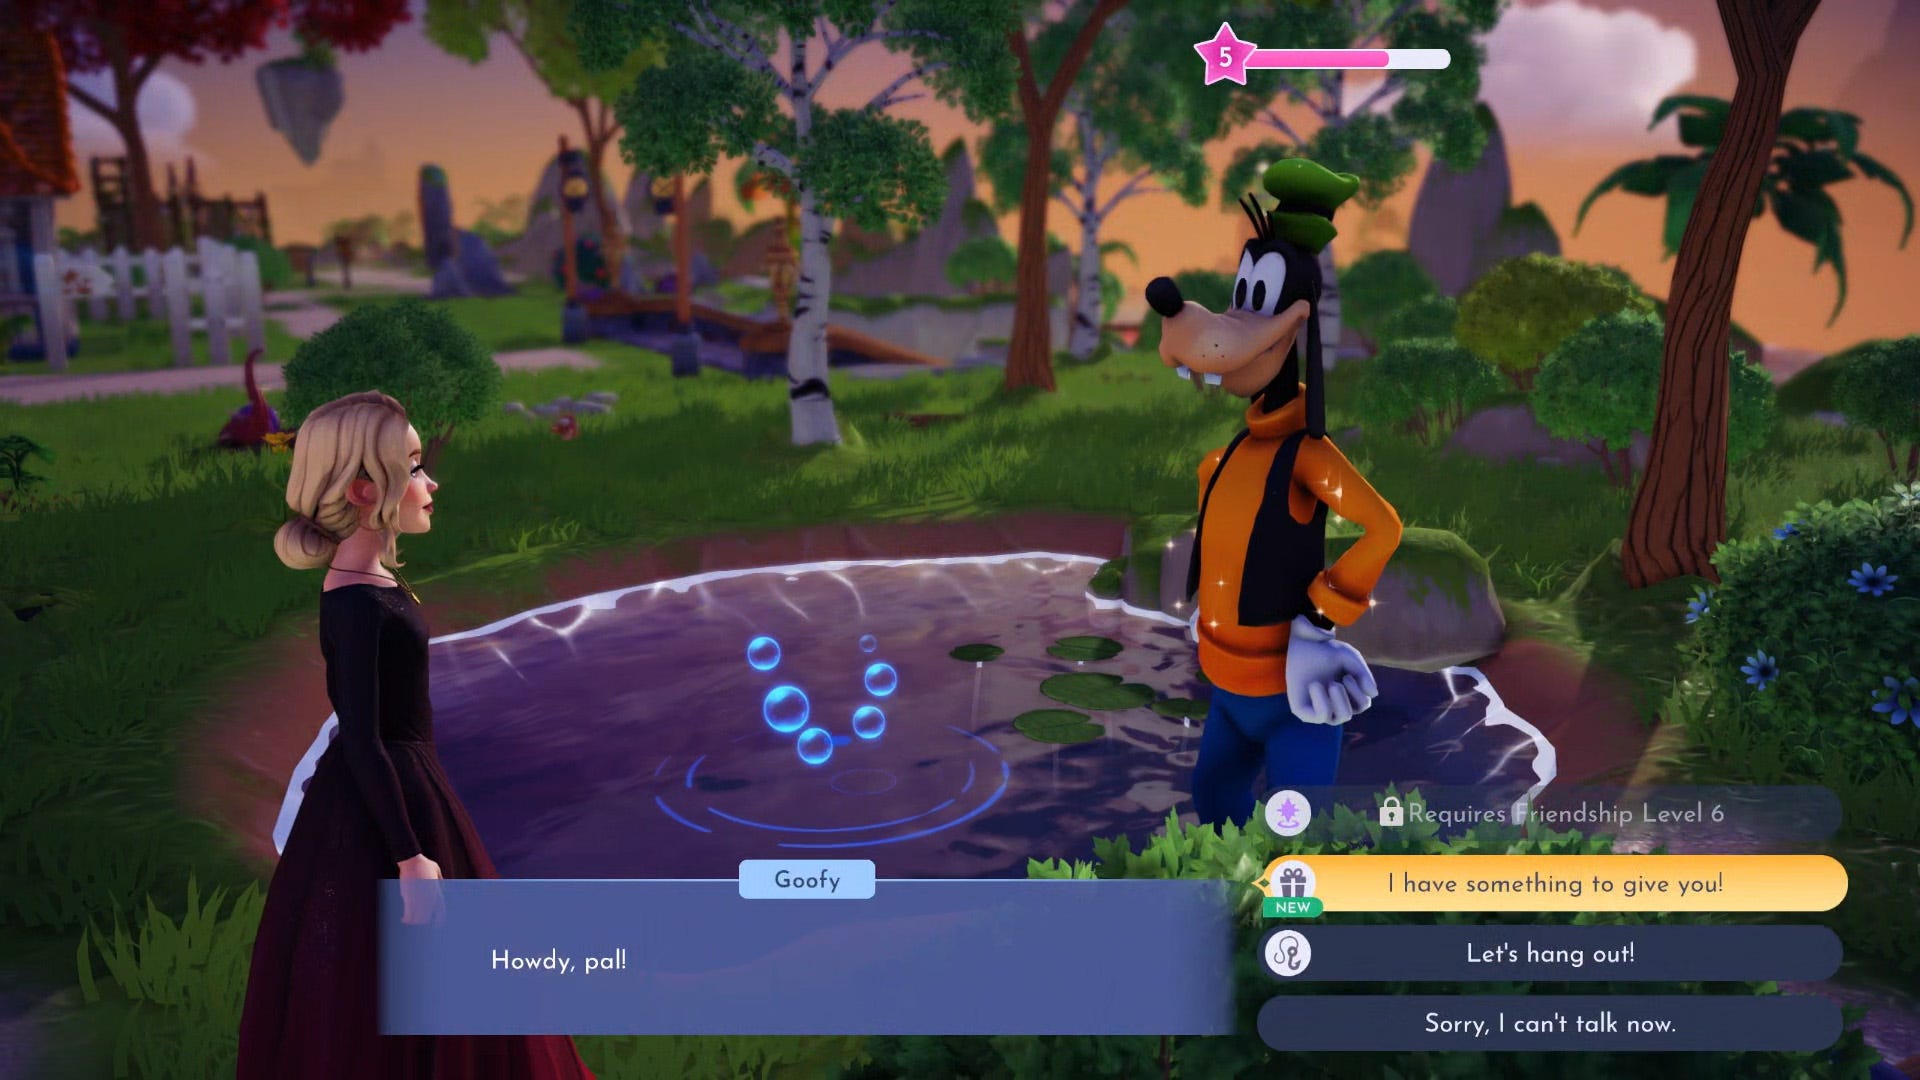 an image of a virtual girl and Goofy standing beside a pond.